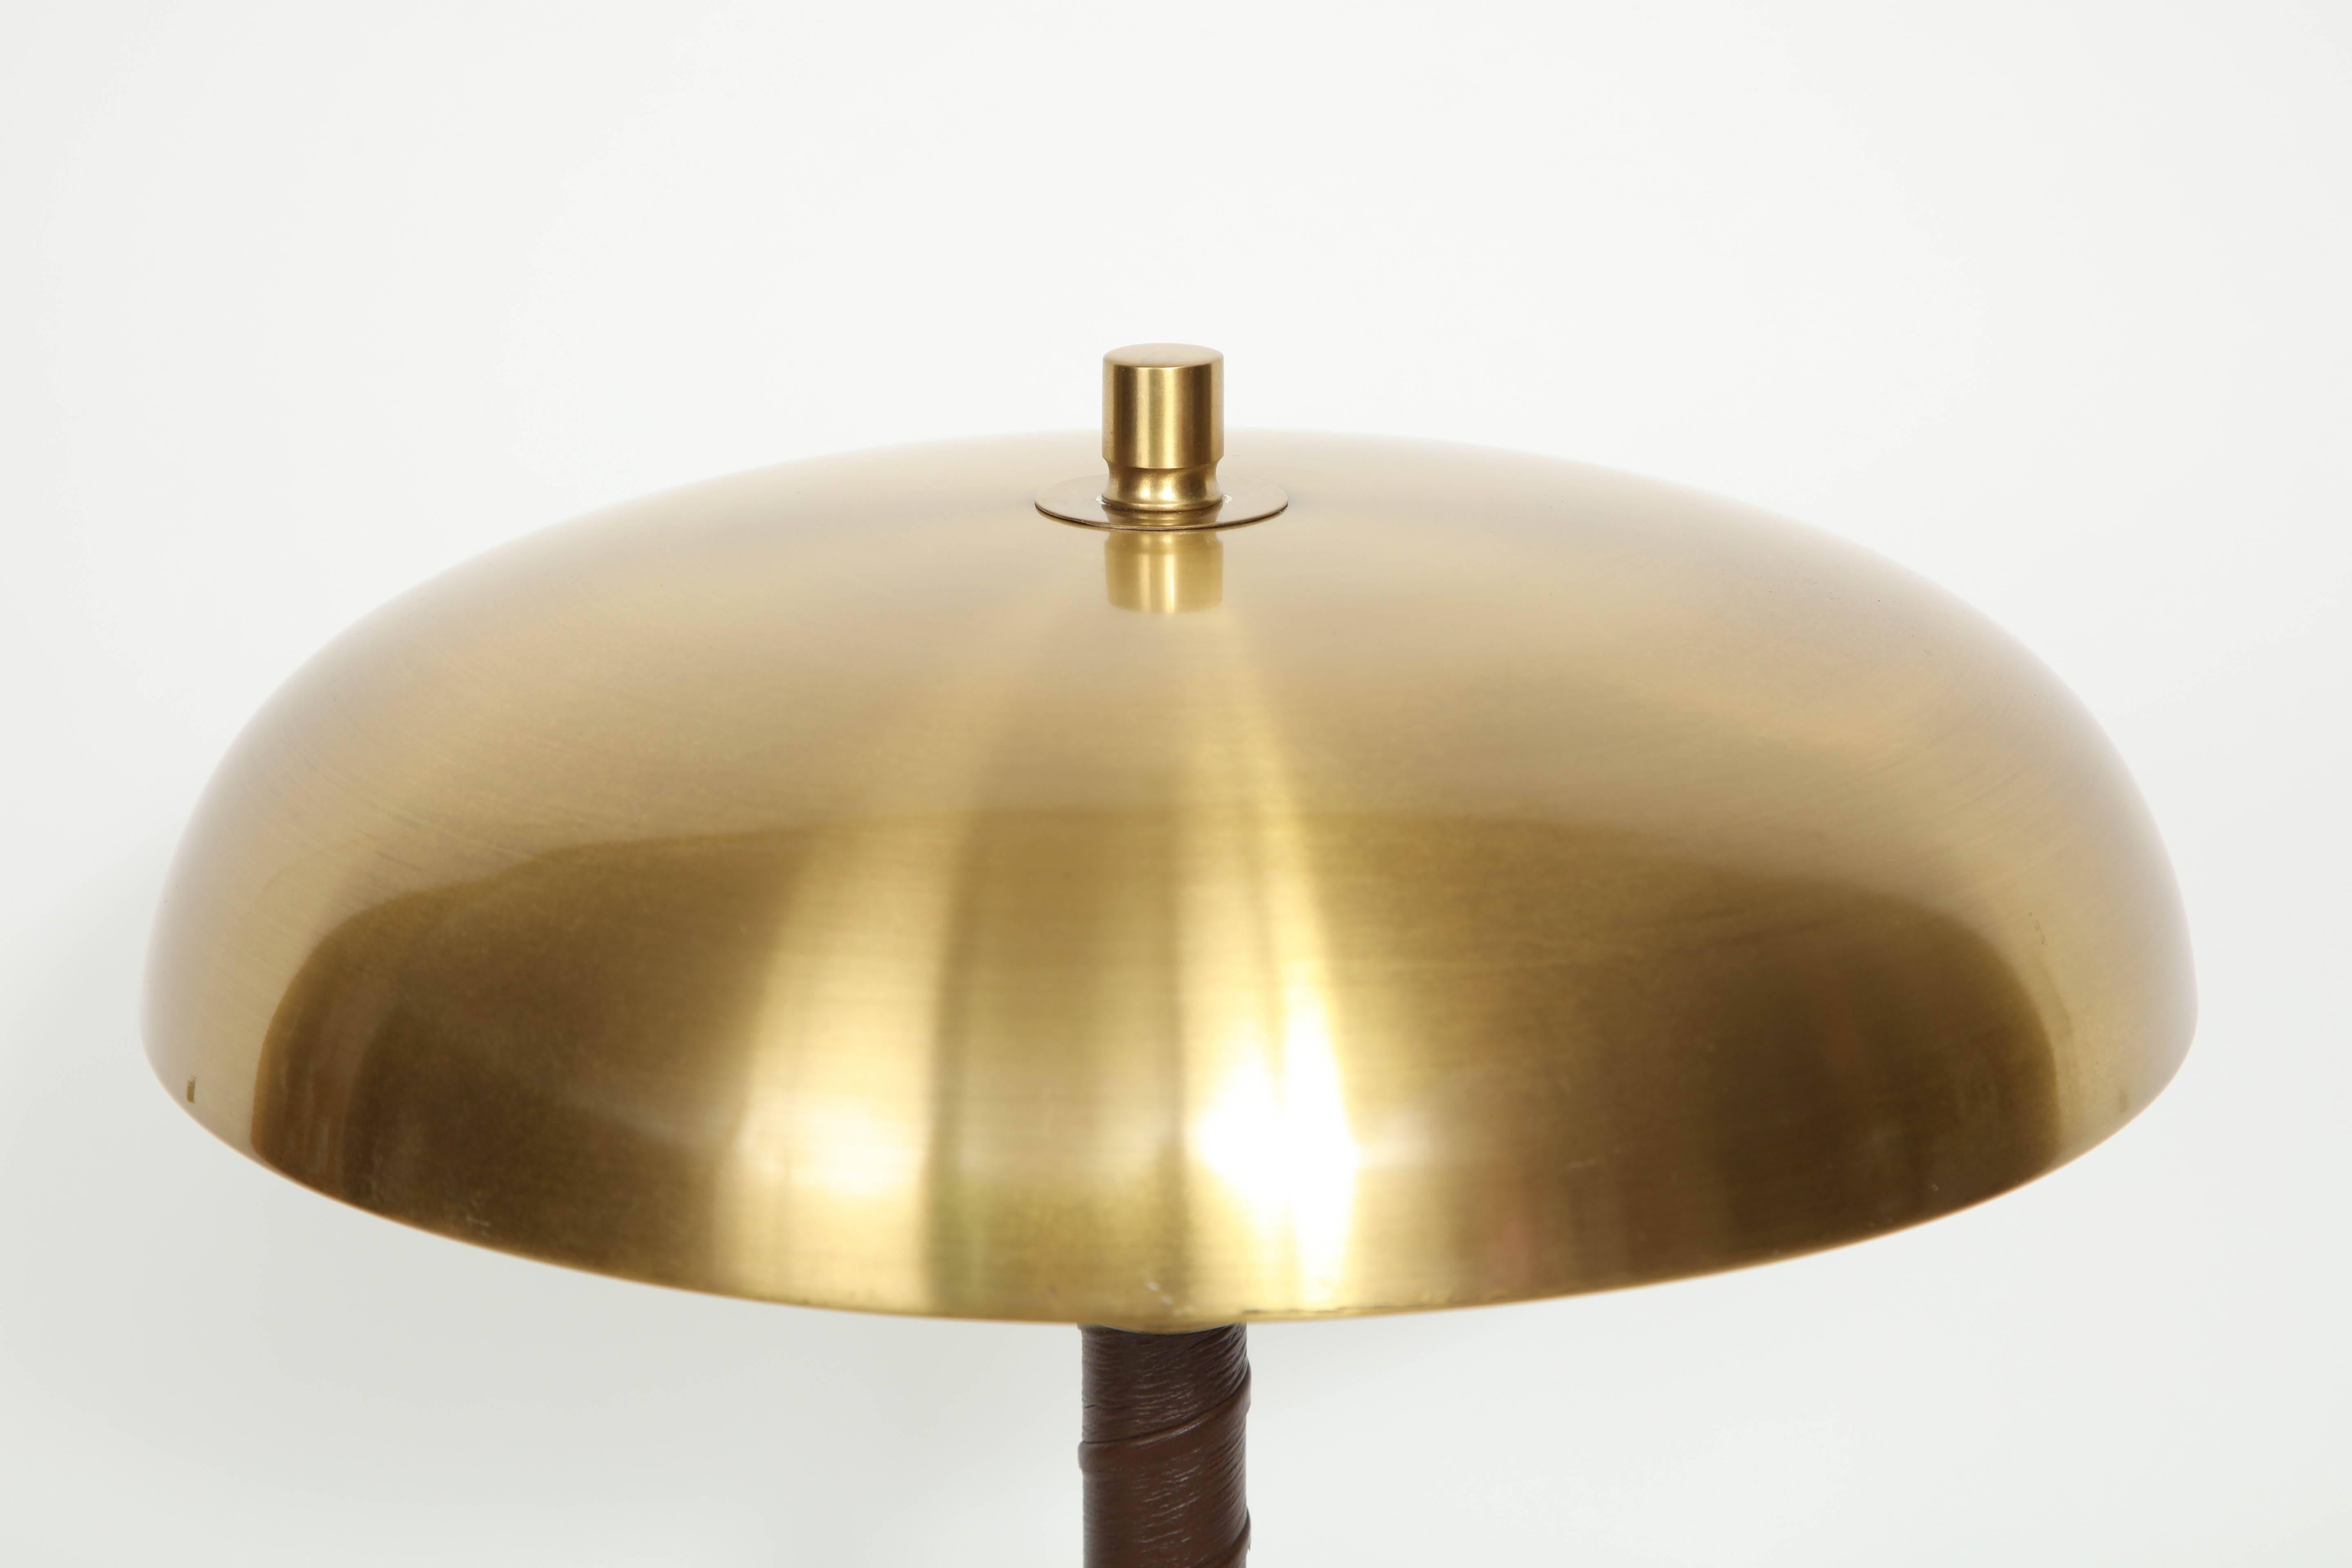 Swedish table lamp by Einar Båckström, Malmö, circa 1940s dome brass top with a dark leather wrapped stem. Restored and rewired for US (2 x 60w max).